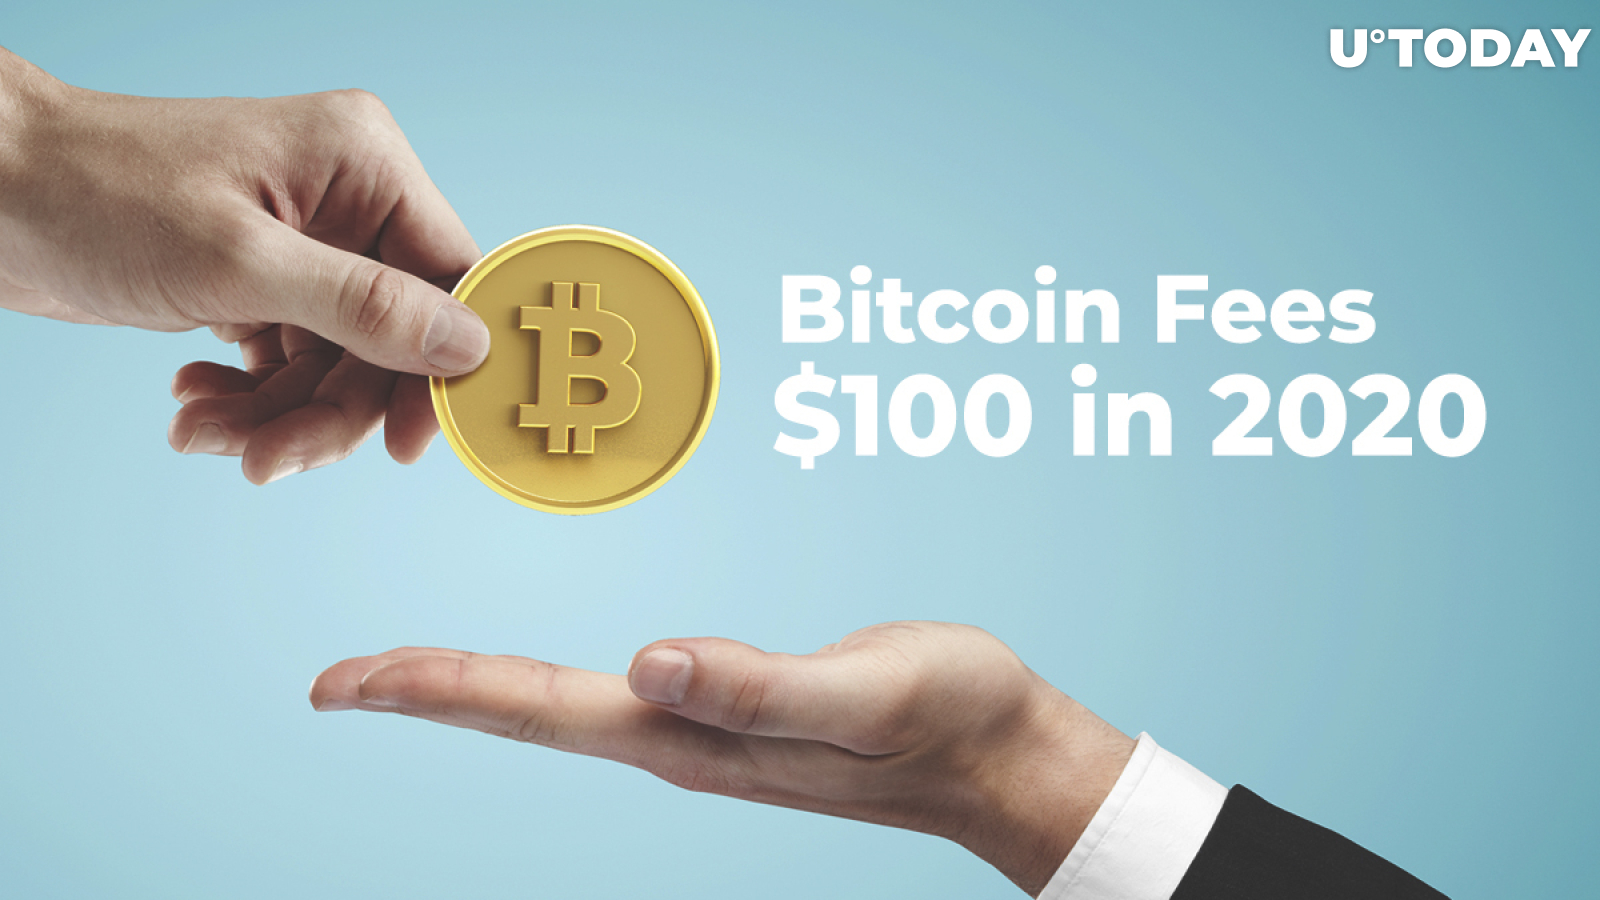 Bitcoin Fees Could Exceed $100 in 2020: Blockchain Capital